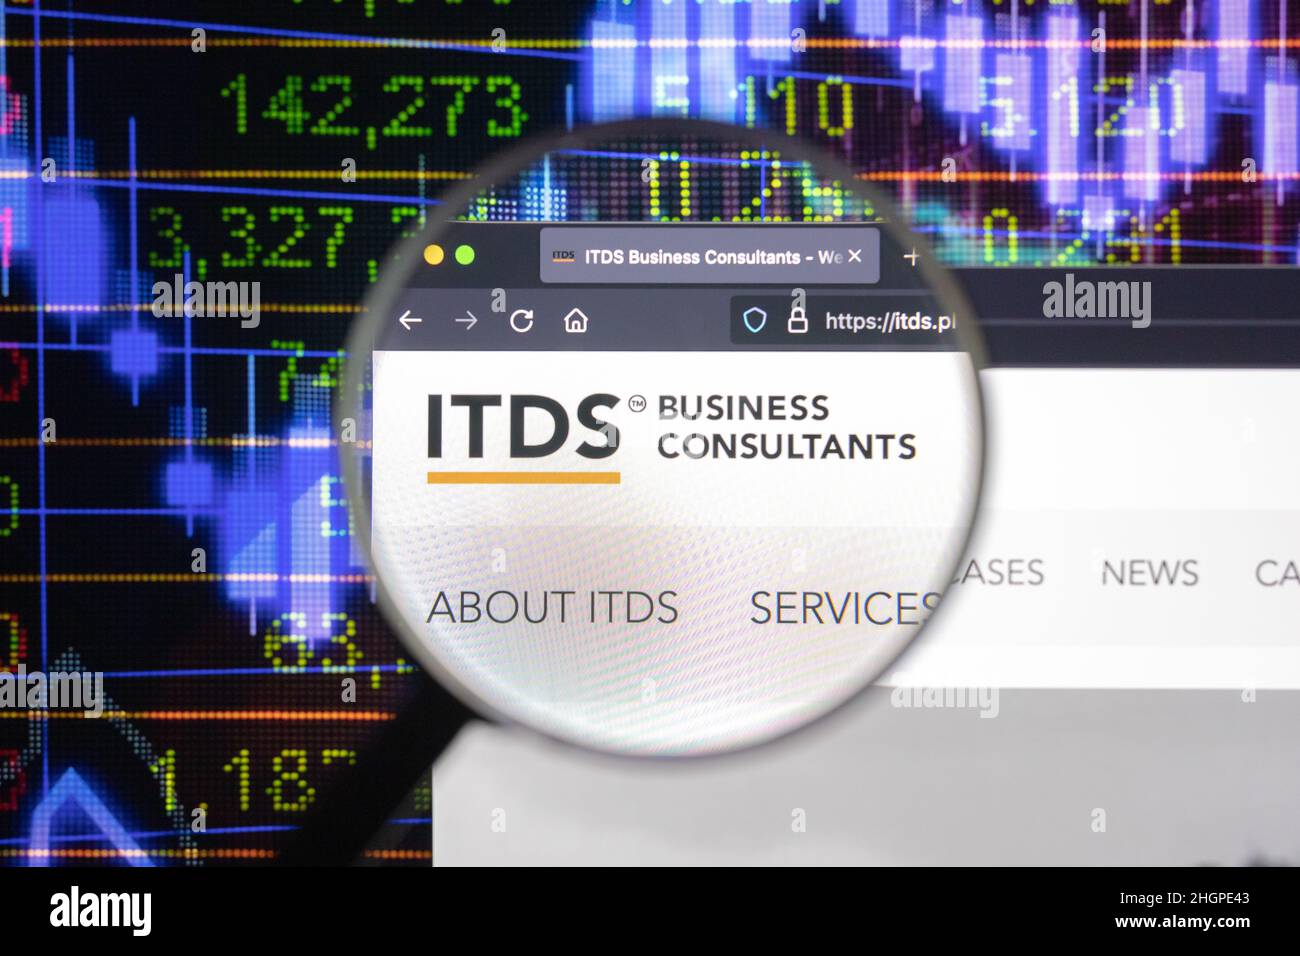 ITDS Business Consultants company logo on a website with blurry stock market developments in the background, seen on a computer screen Stock Photo